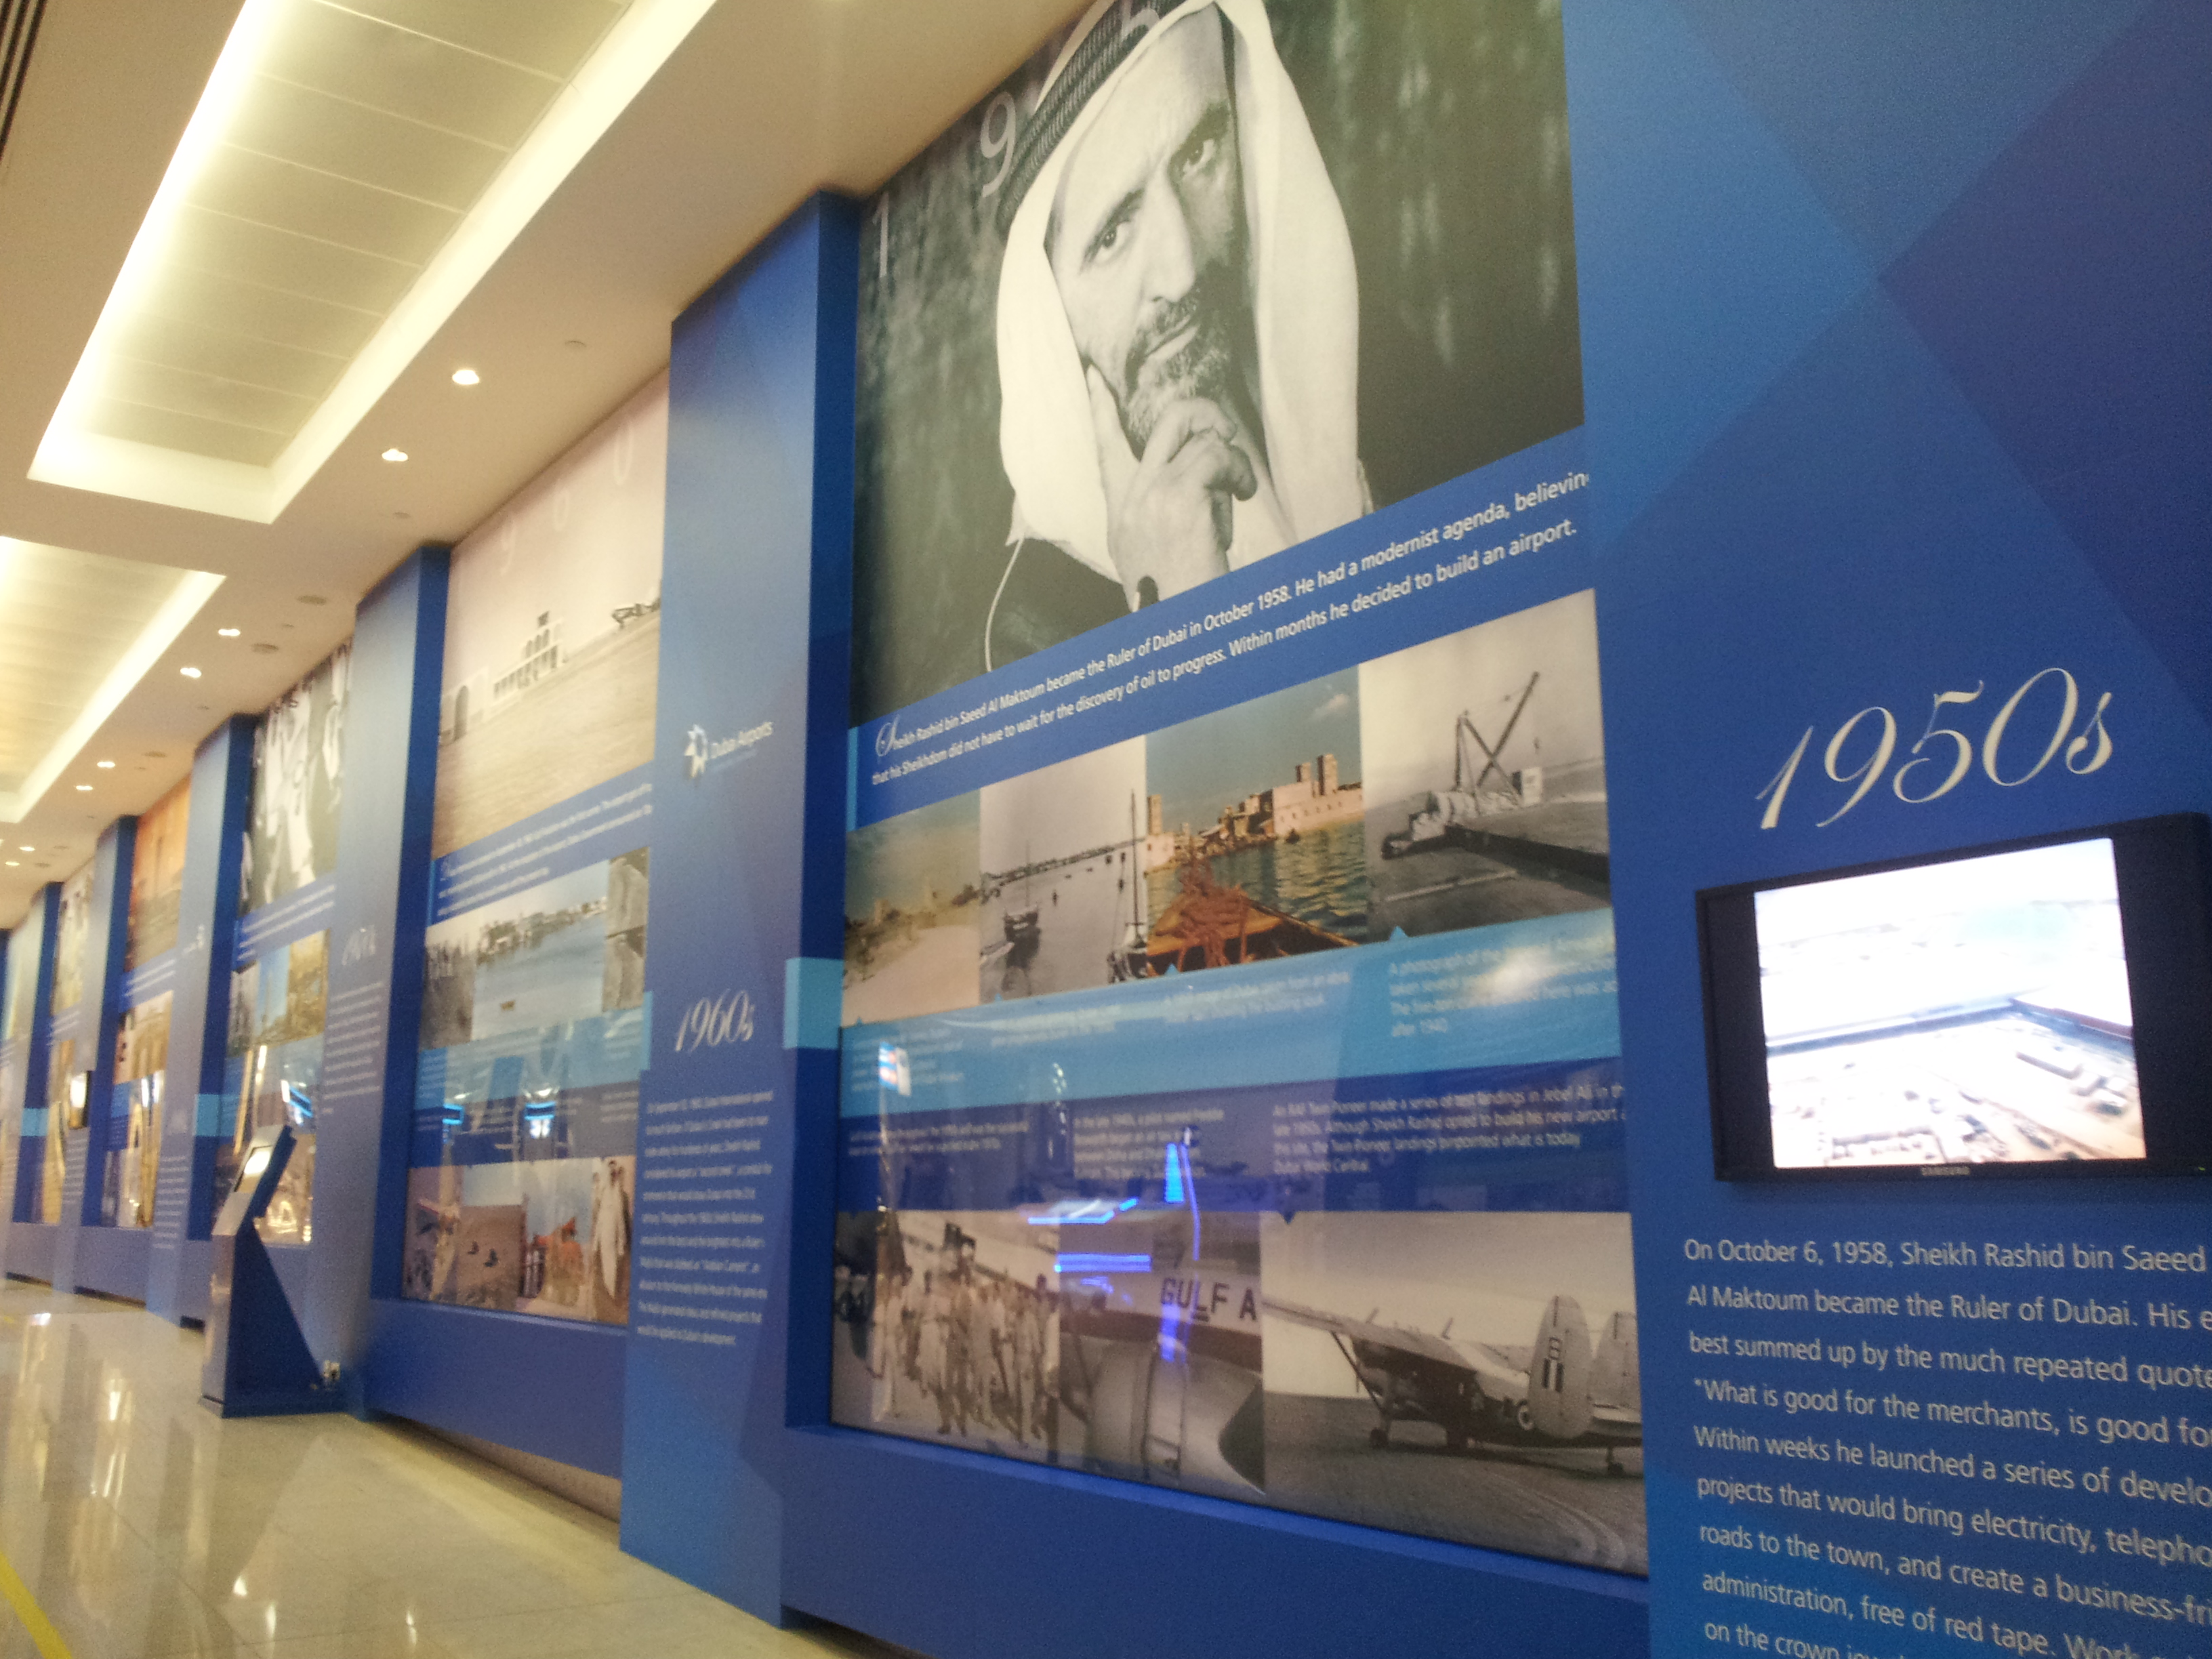 The Dubai aviation exhibiis one of the best long layover airports for passing the time